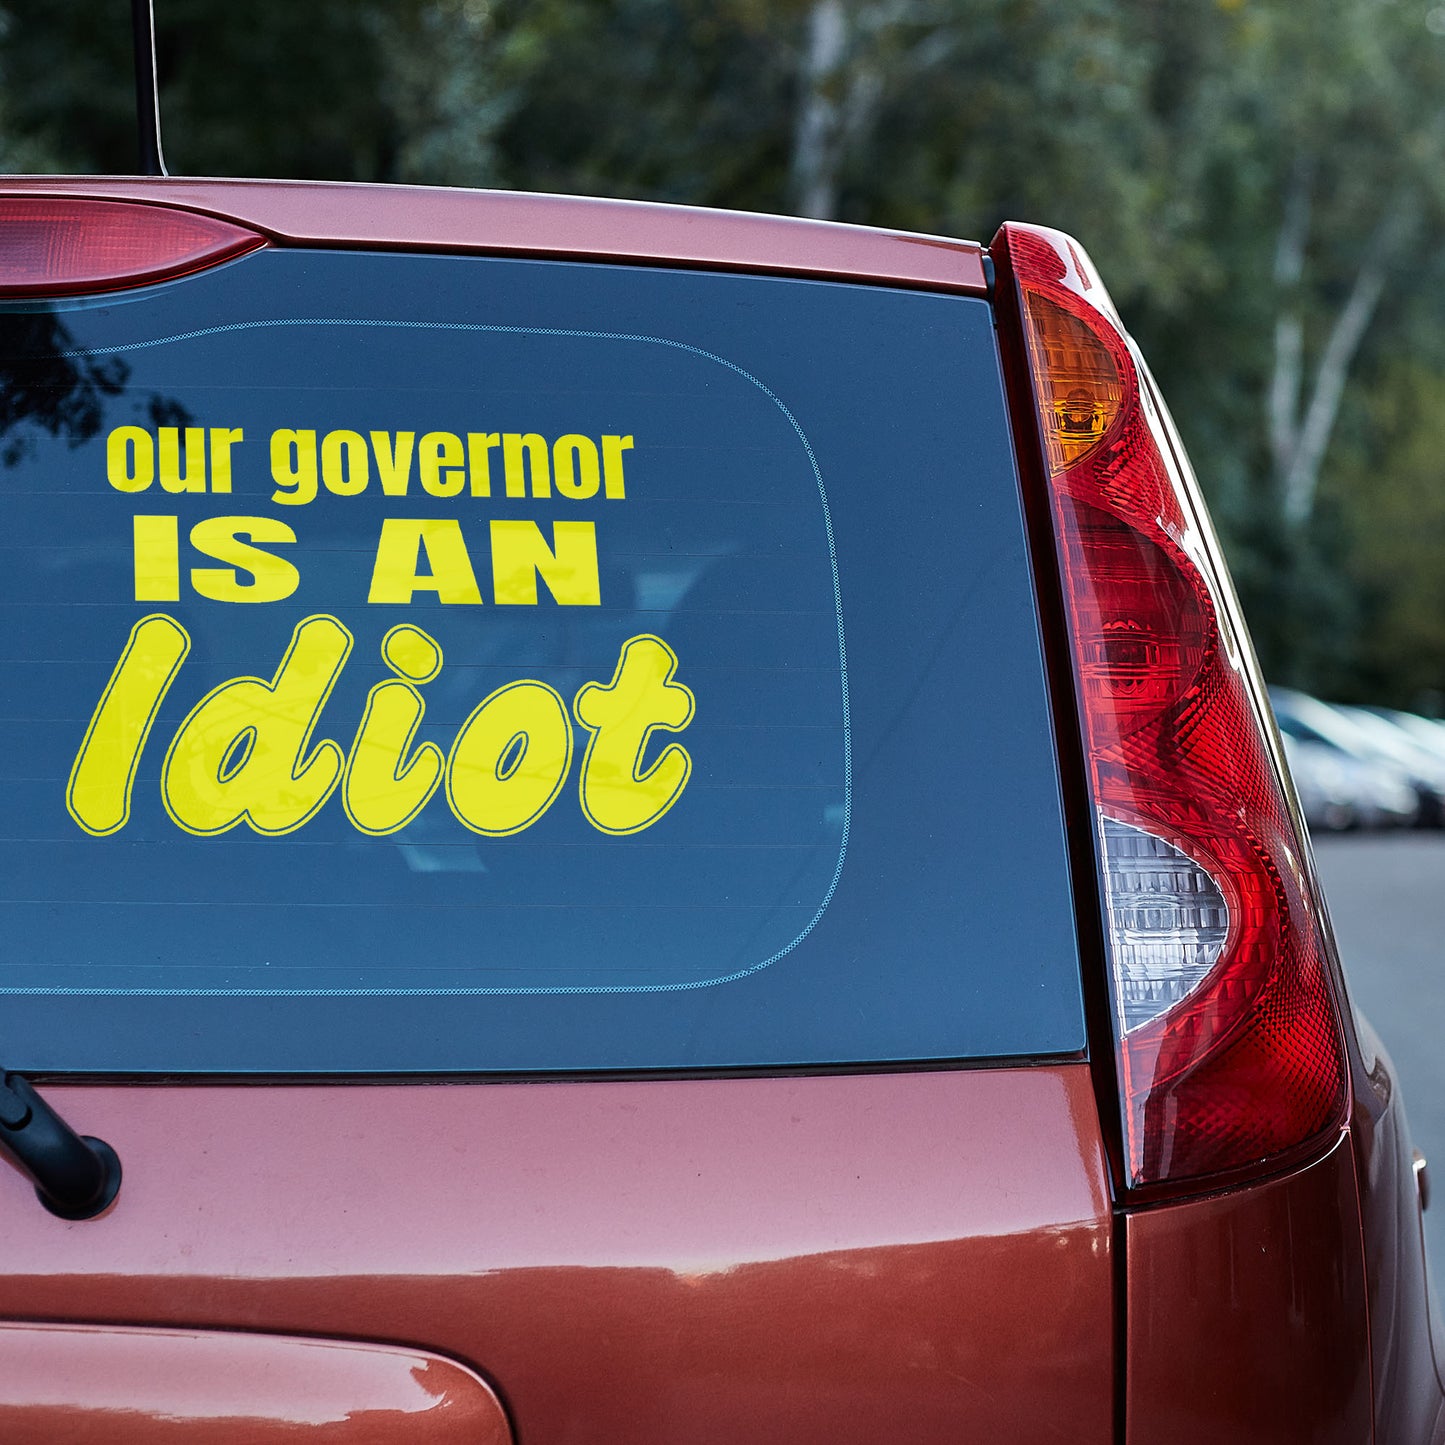 Our governor is an idiot vinyl decal car decal decal for cars decal for trucks Decals for cars Decals for Trucks decals for tumblers decals for vehicles door decal funny decals Window decals